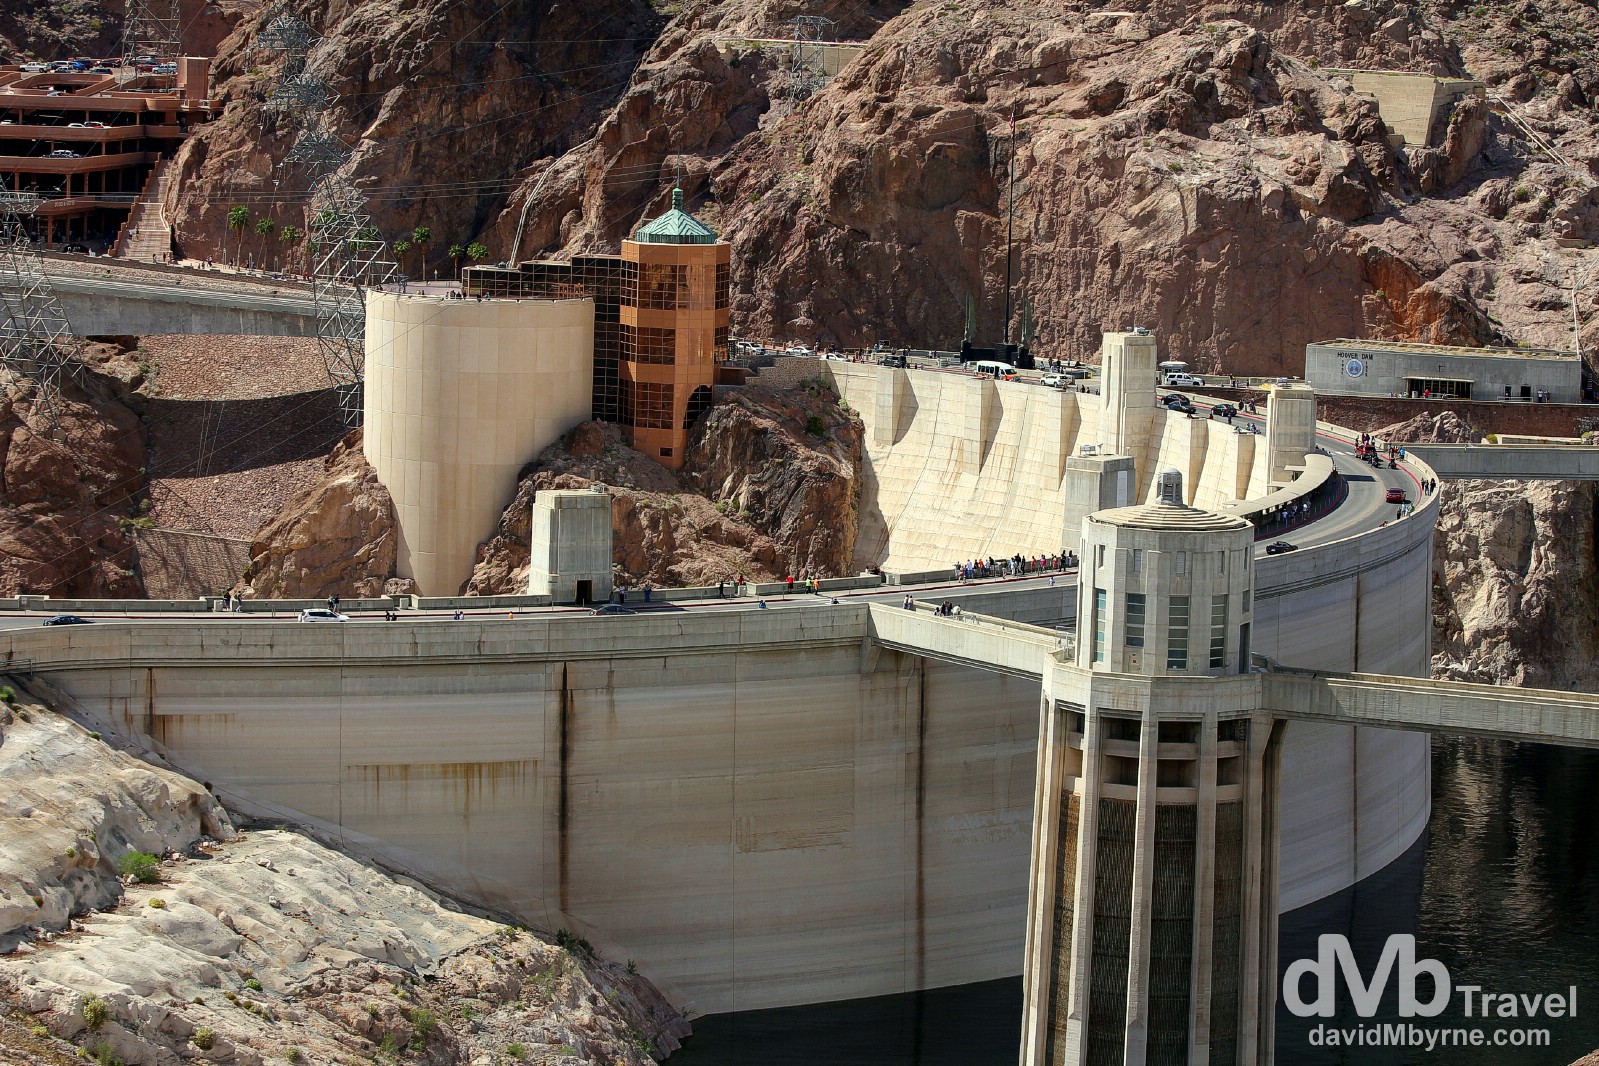 Taken from the Arizona side, the rear of the Hoover Dam on the Nevada & Arizona border, USA. April 6th 2013.